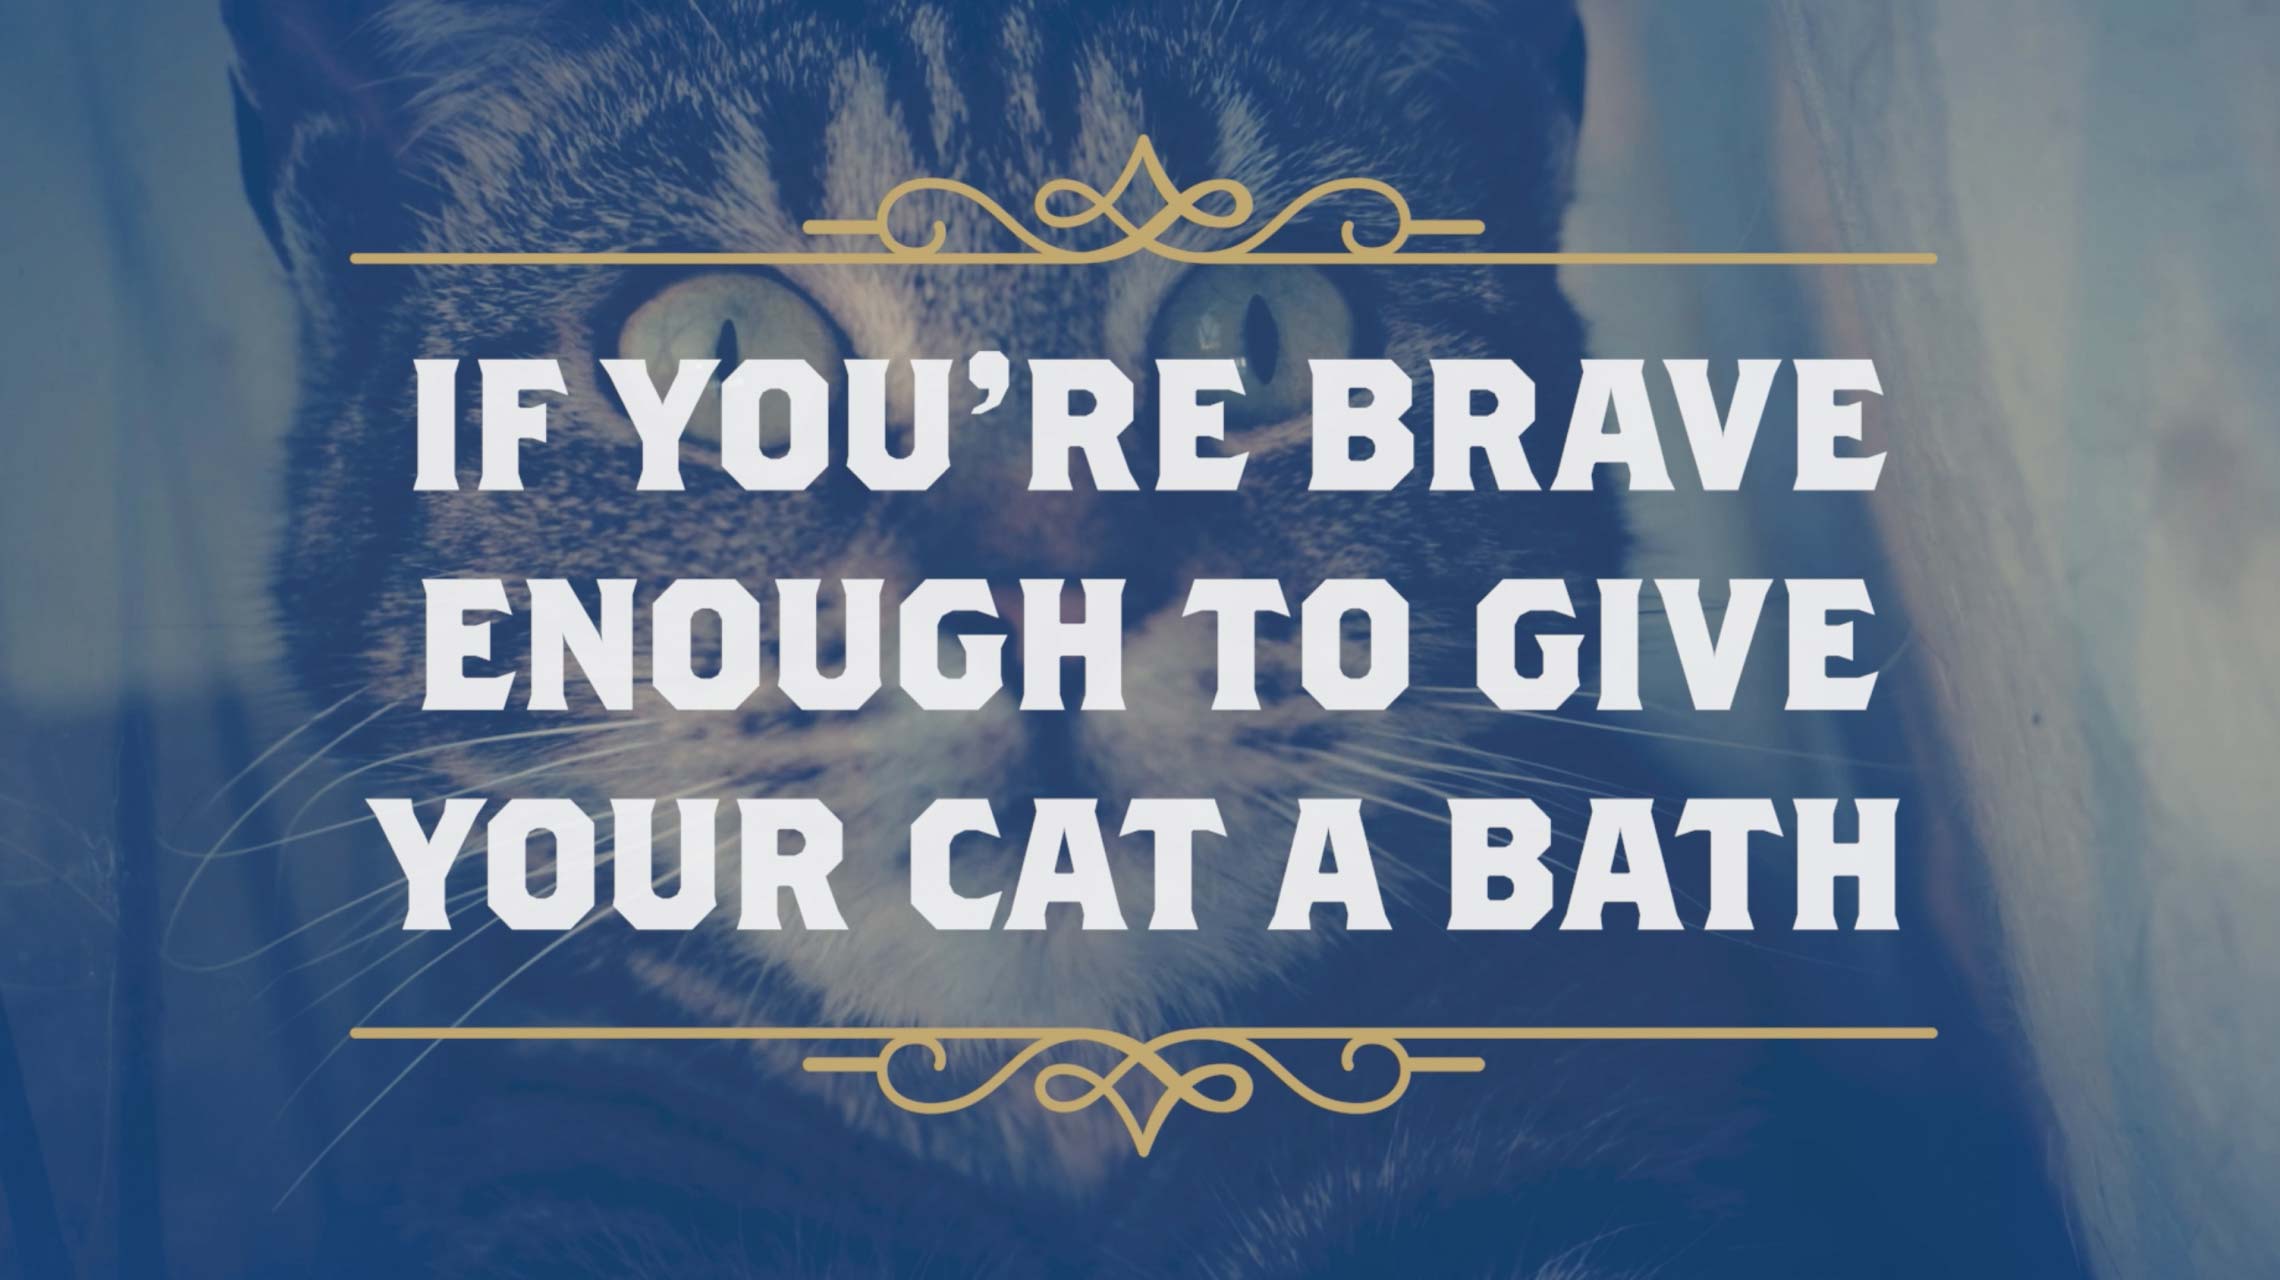 "If you're brave enough to give your cat a bath." Click to watch the video.